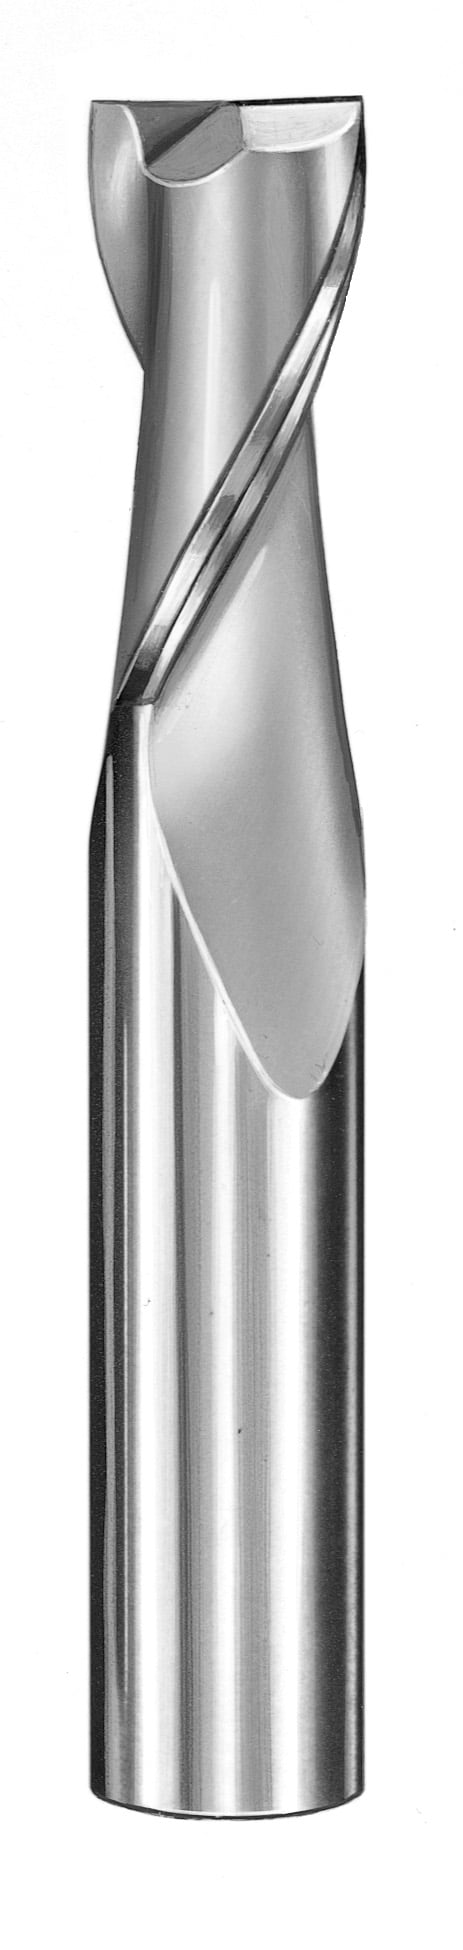 31/64" Dia, 2 Flute, Square End End Mill - 30361